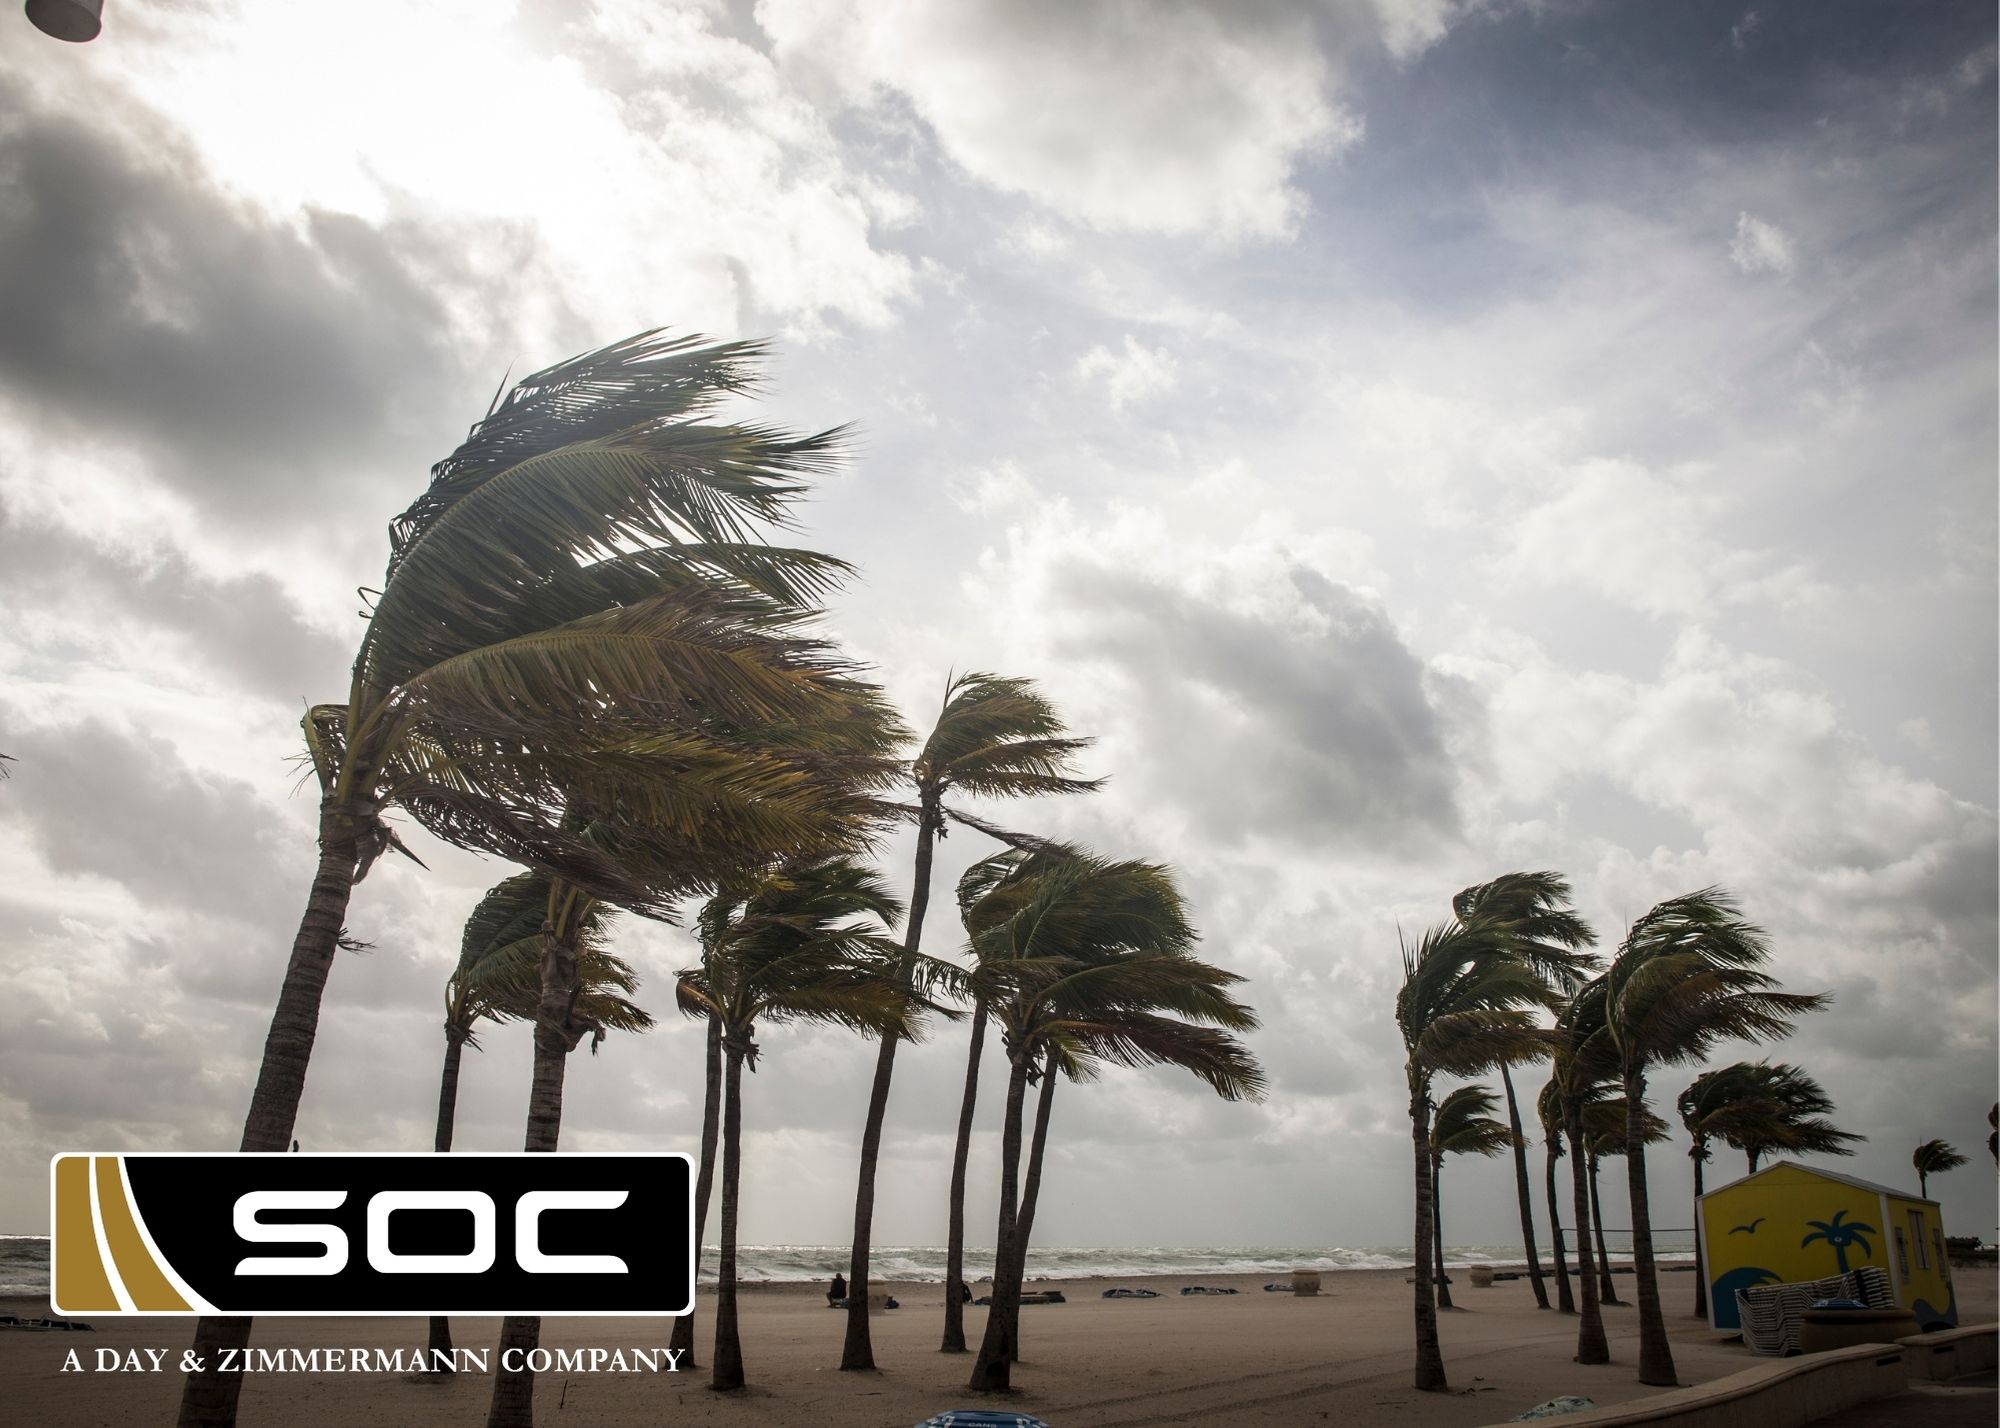 SOC Joins as a Ready Responder in Florida’s Emergency Supplier Network